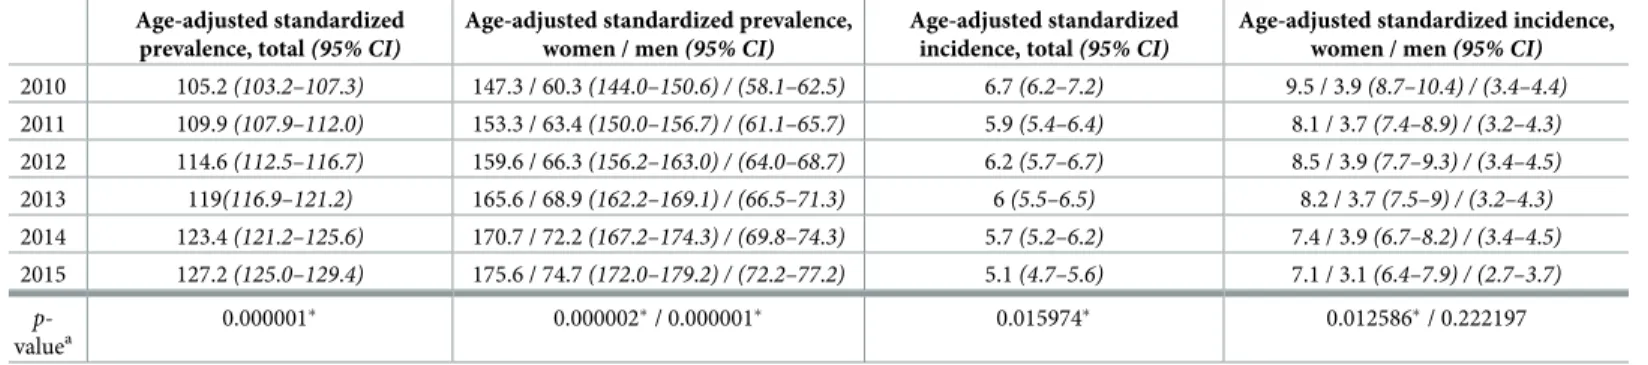 Table 3. Age-adjusted standardized prevalence and incidence of MS in Hungary.